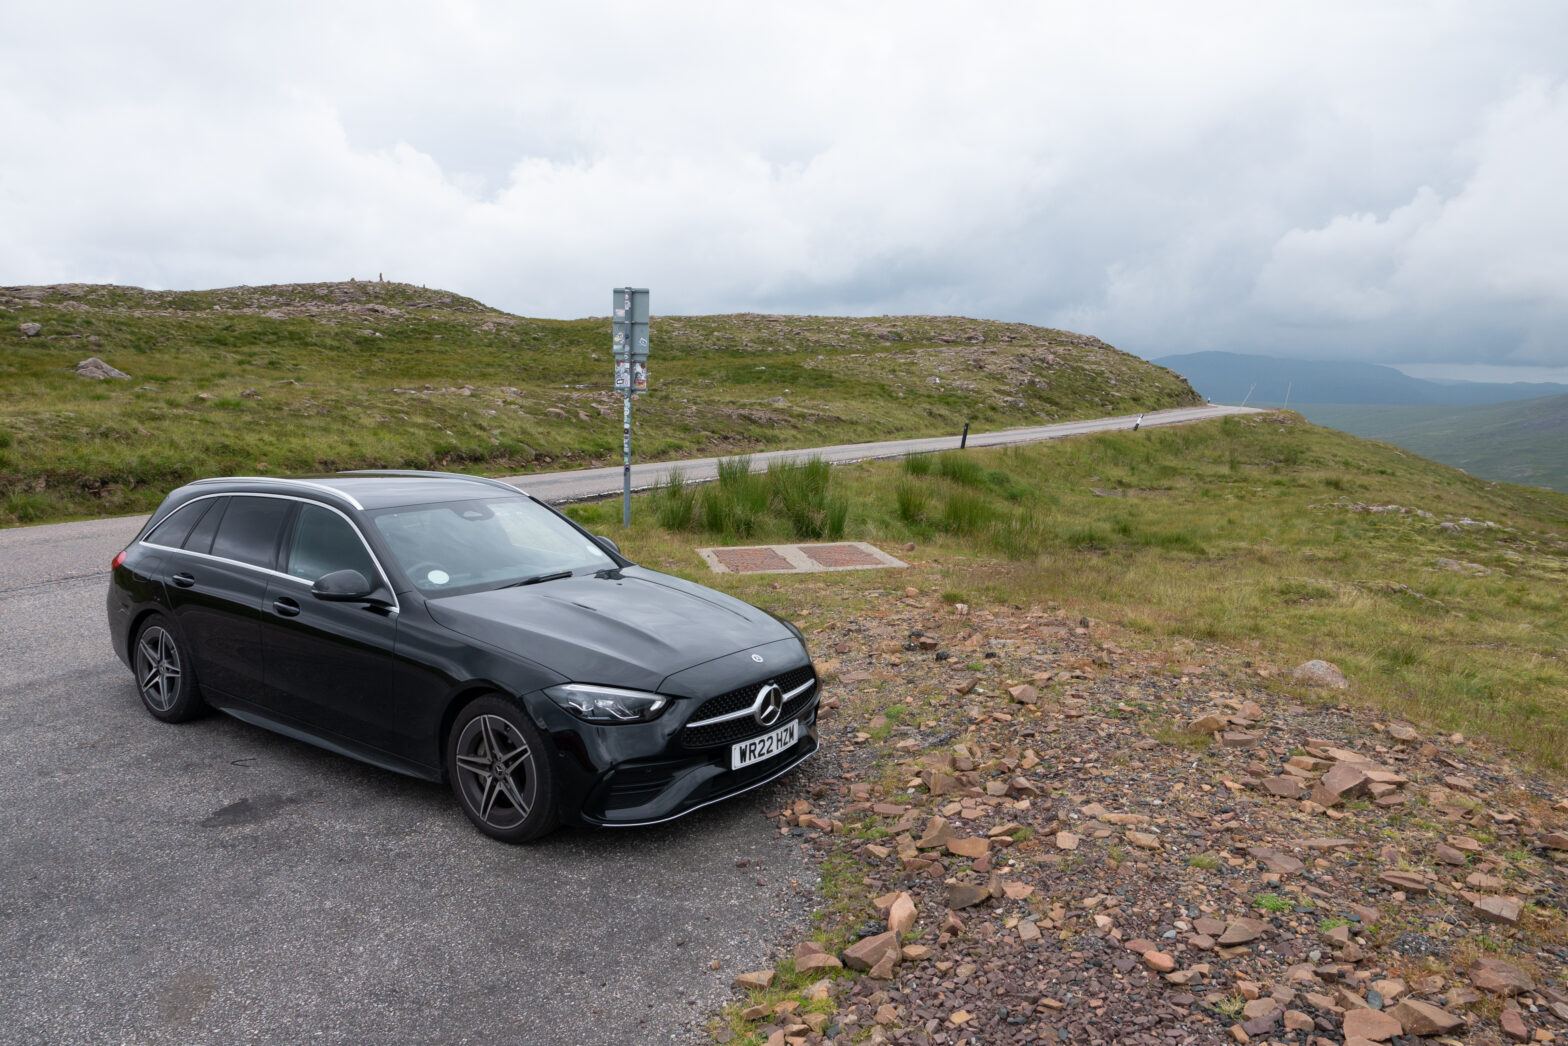 Our rental Mercedes C200 wagon parked alongside a road, high up in the Scottish highlands